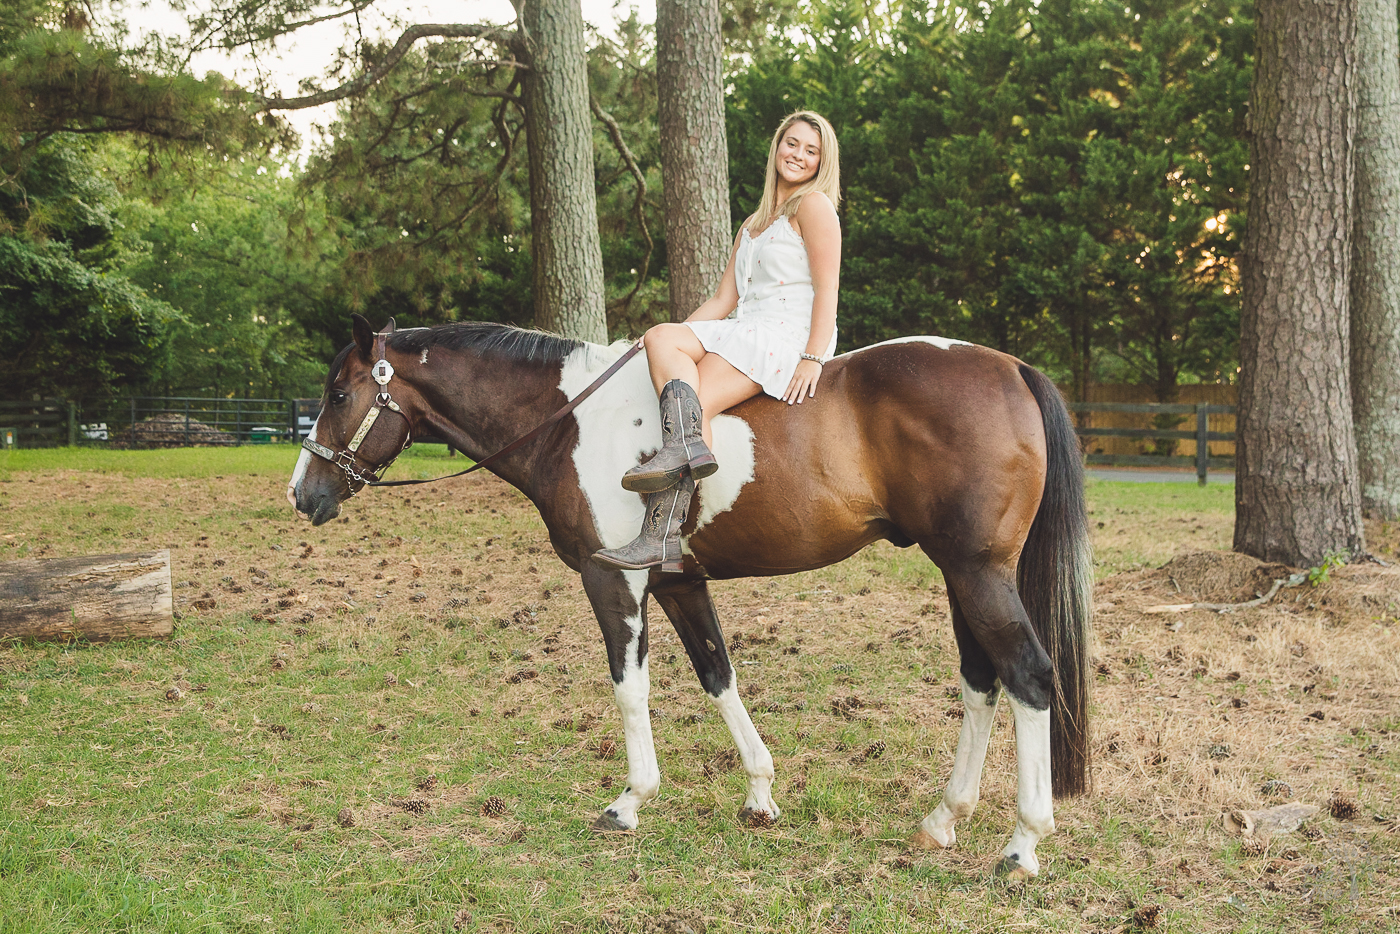 Senior photographs with a horse while the girl sits with legs crossed on his back